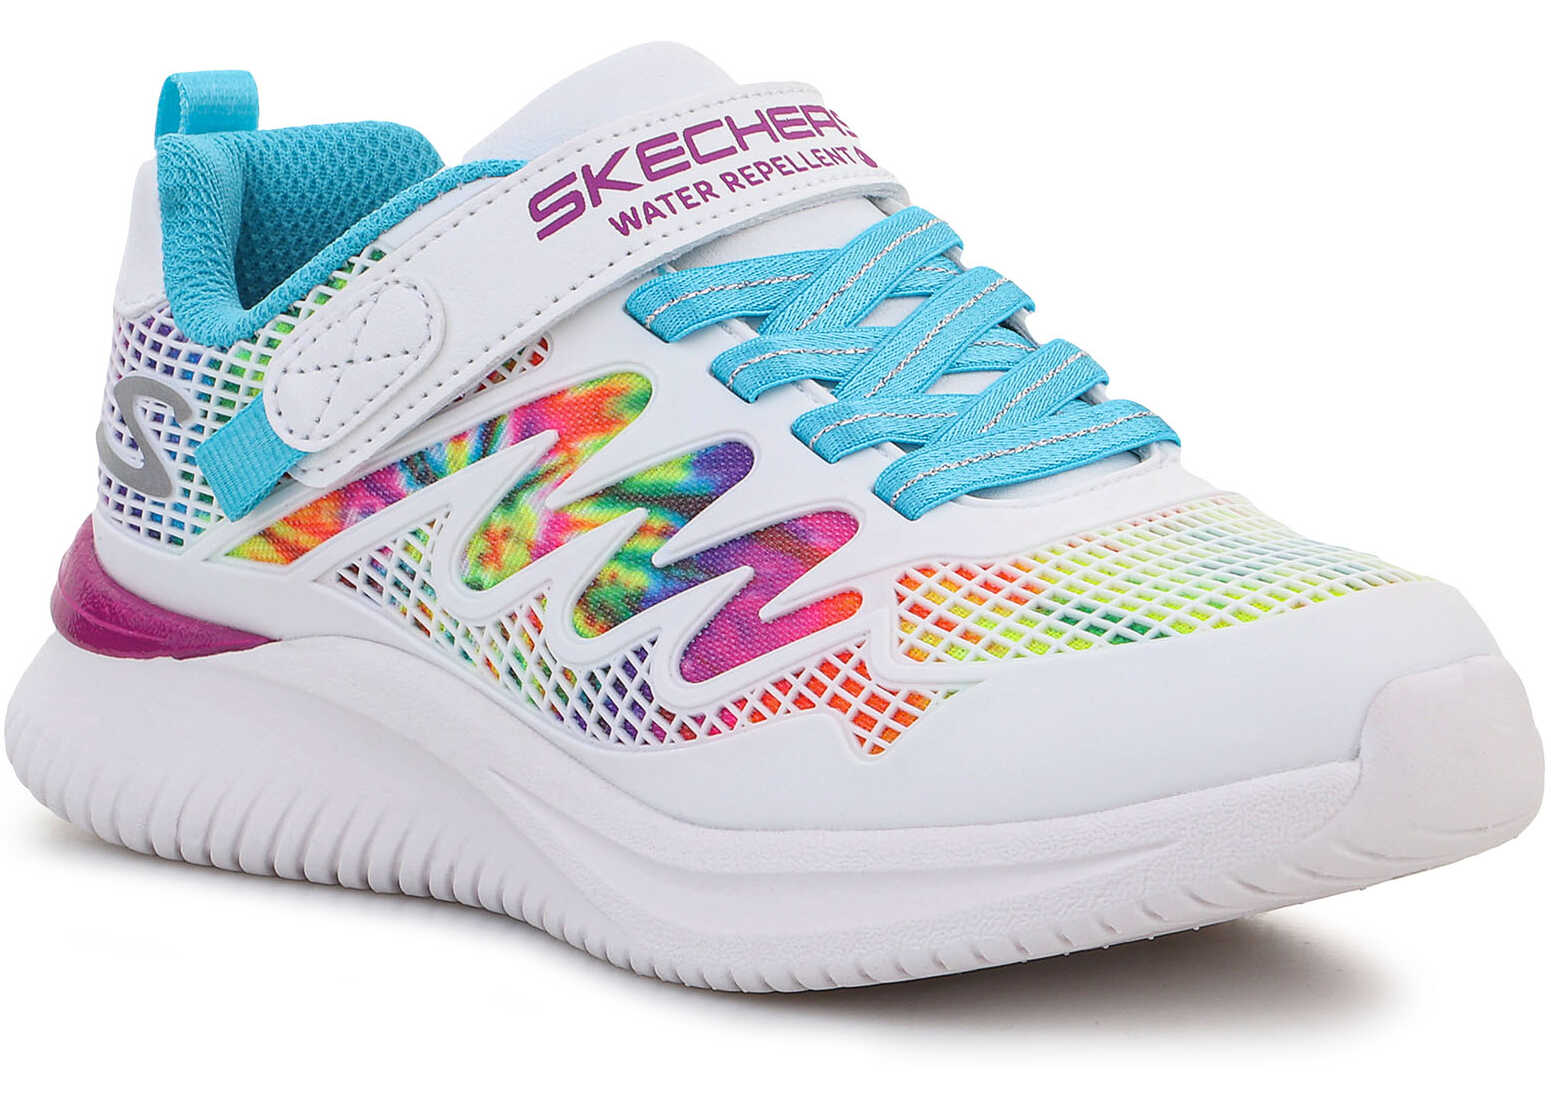 SKECHERS Shoes Jumpsters Radiant Swirl White